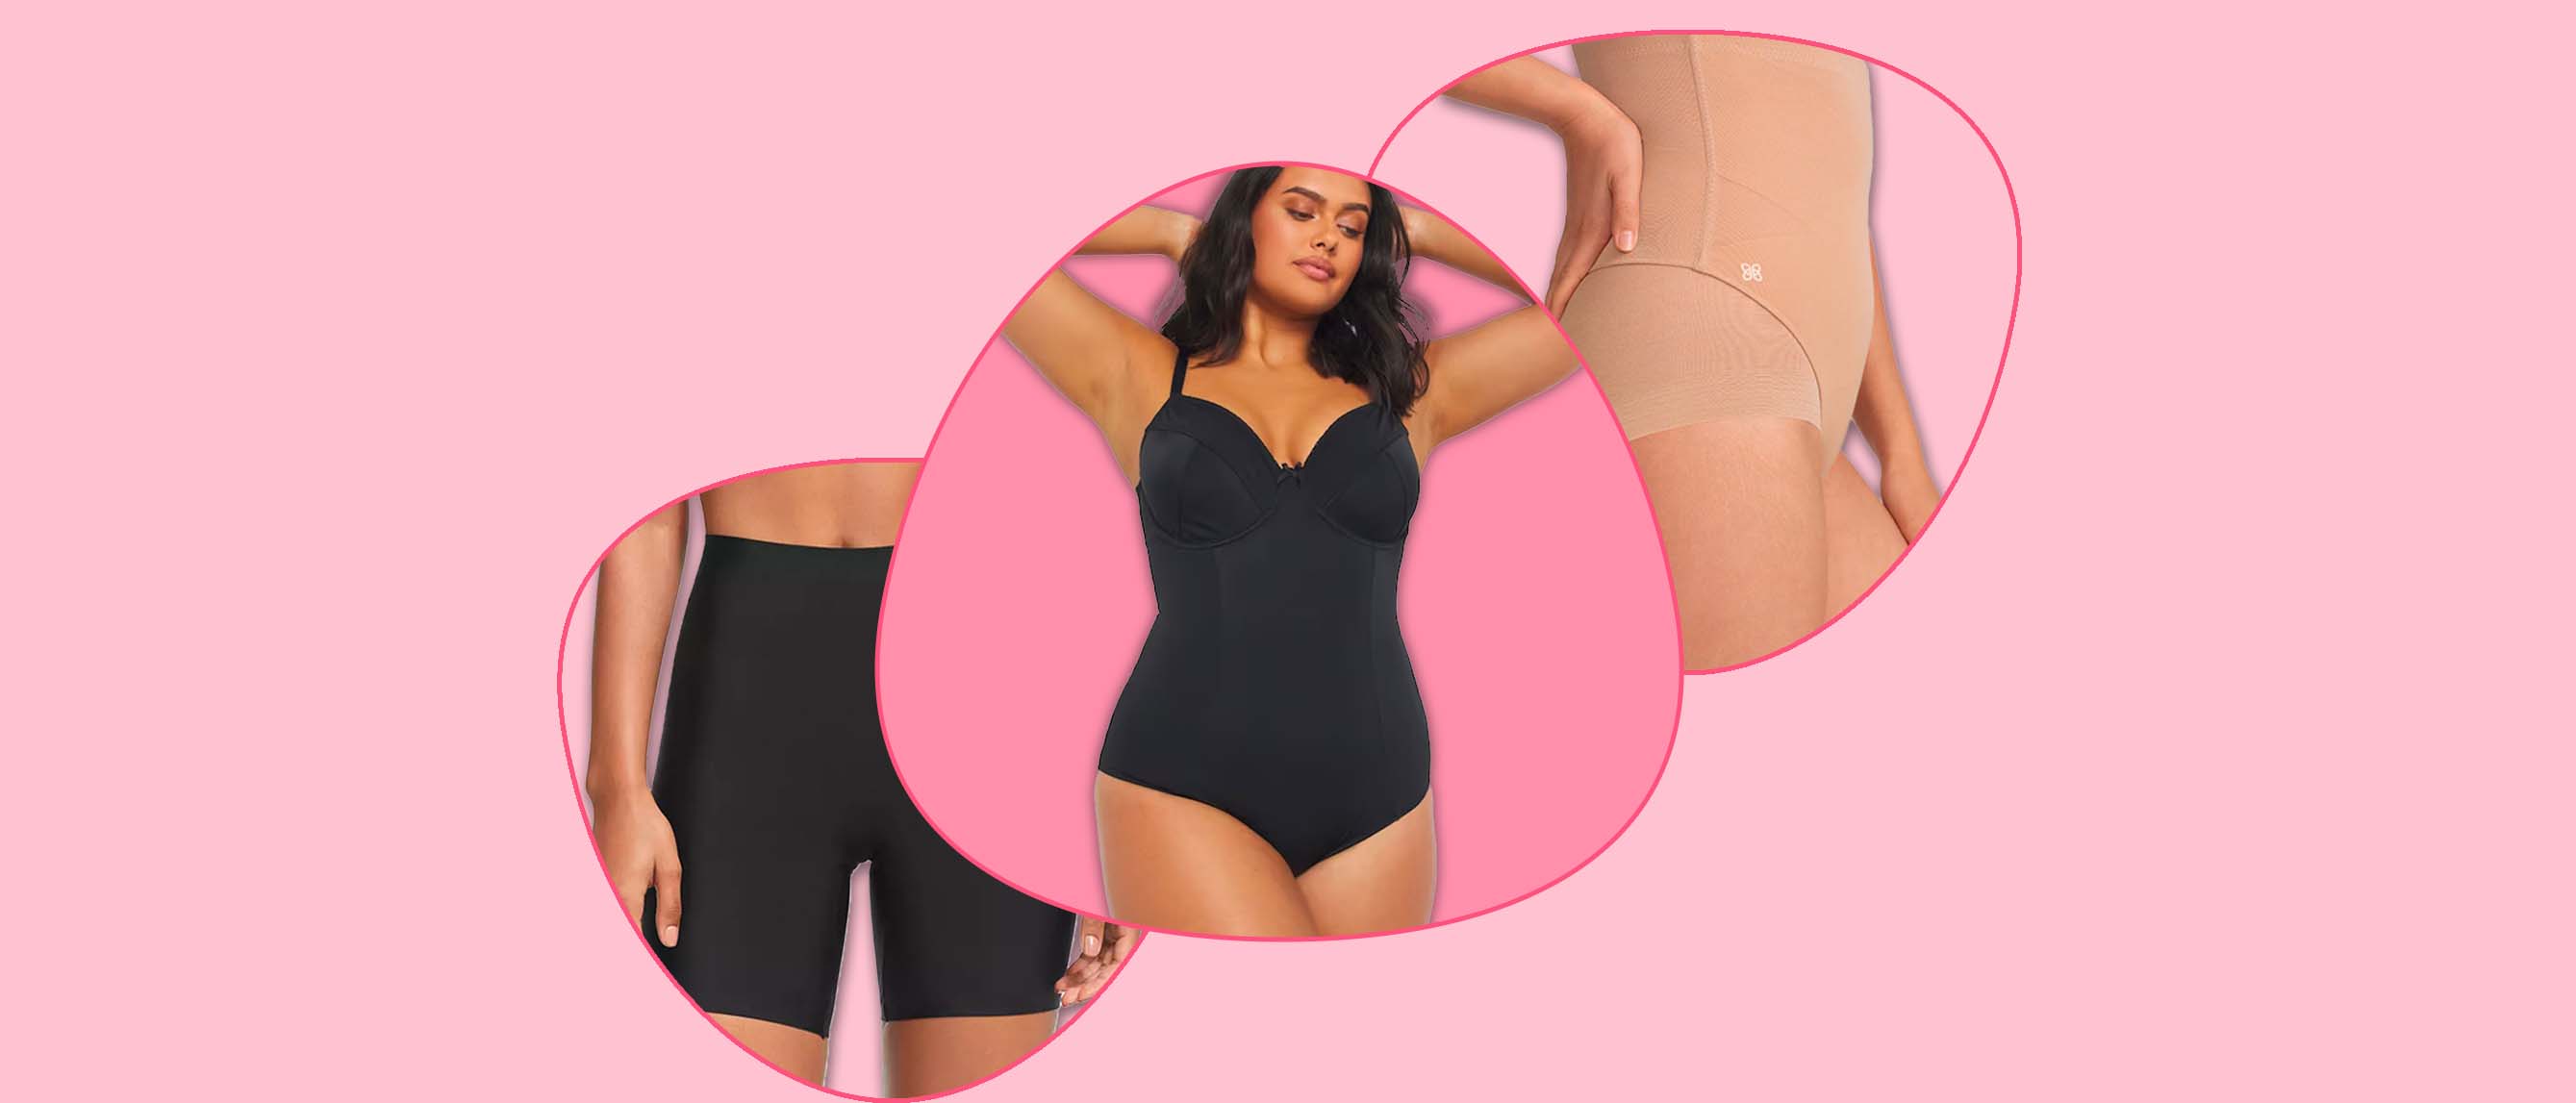 10 slimming and affordable shapewear alternatives to Skims and